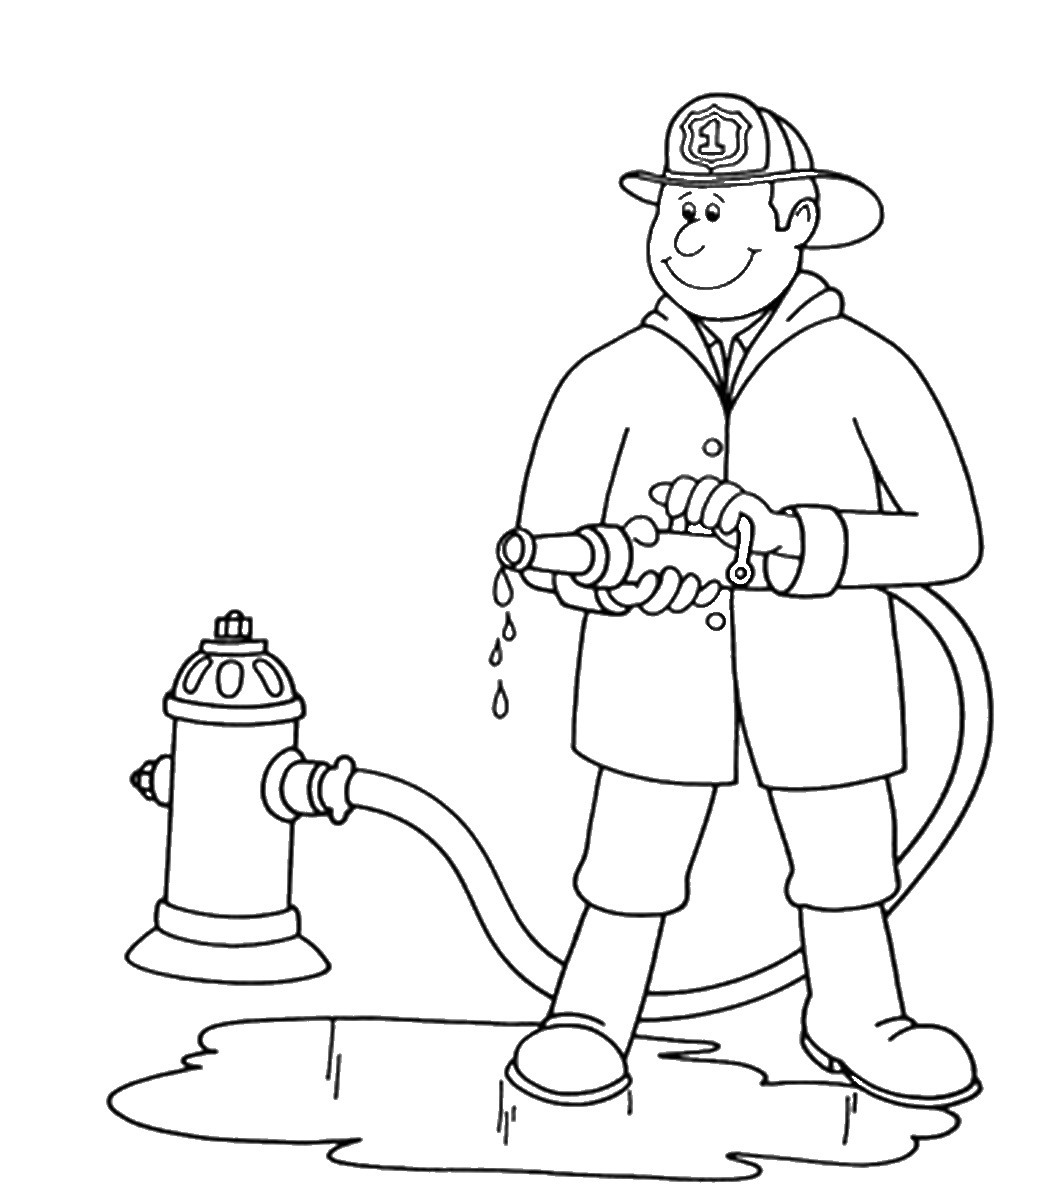 Kid firefighter clipart black and white